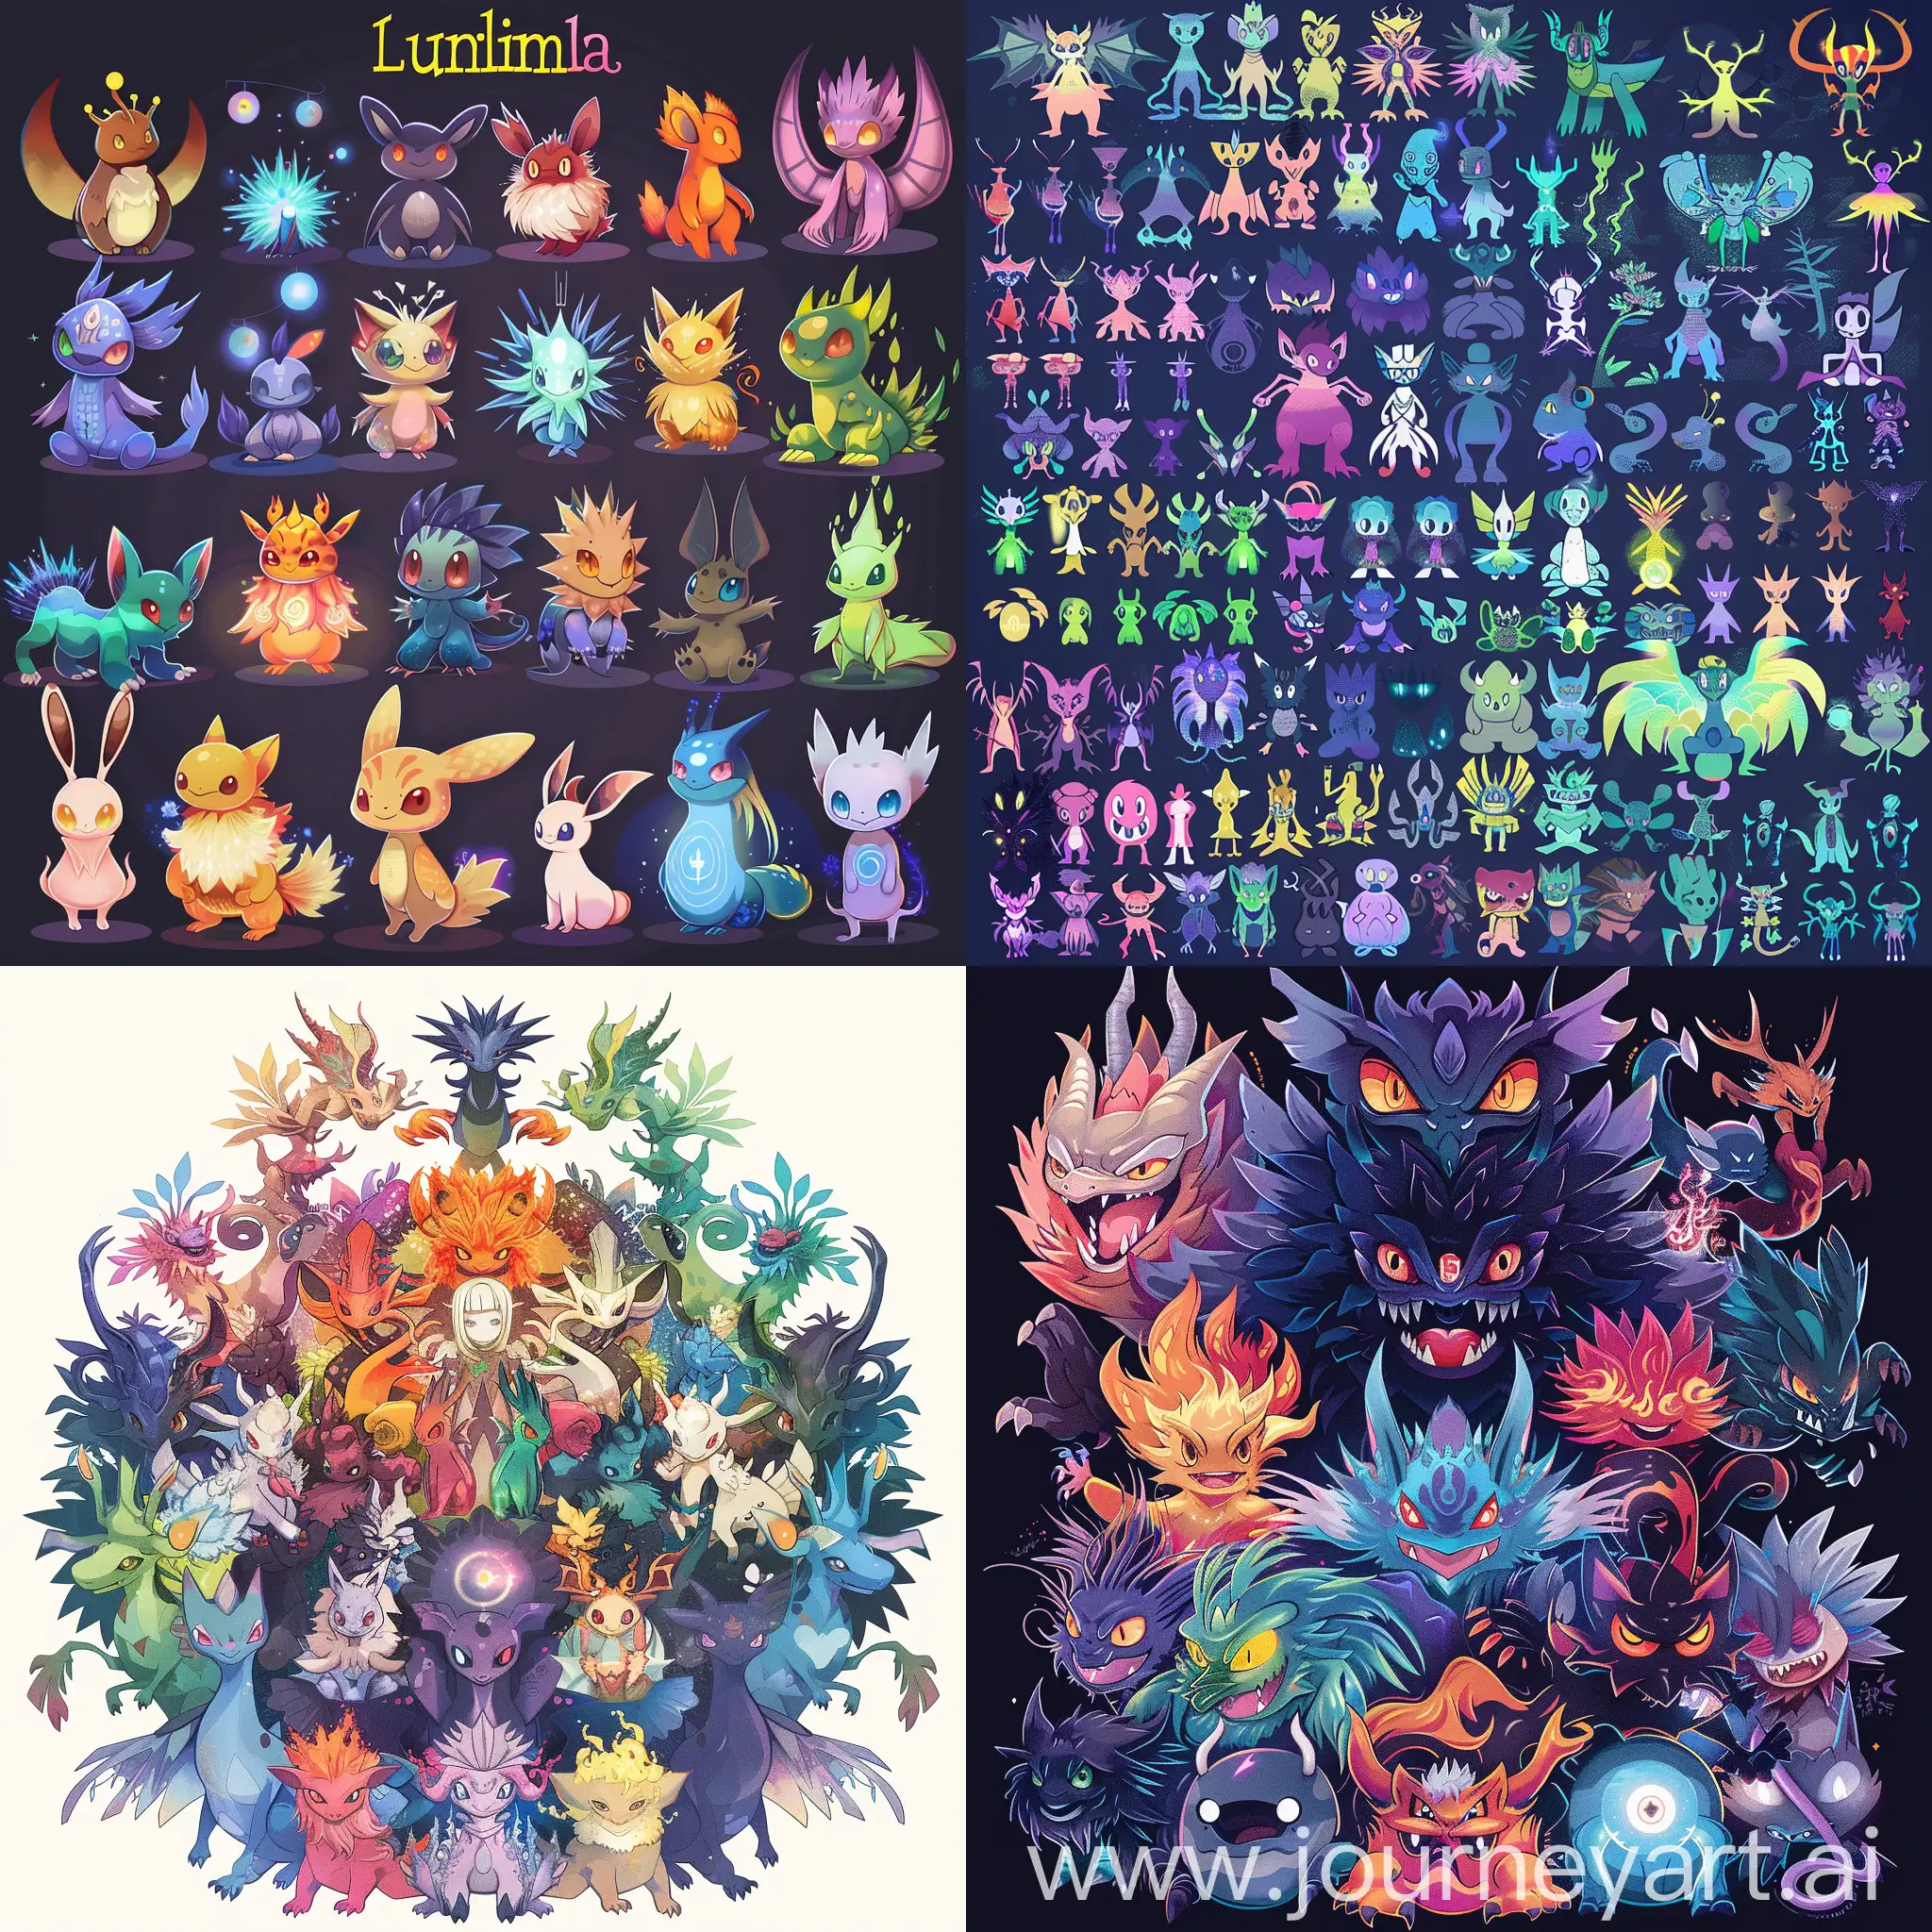 Anime style, one hundred creatures, similar to Pokémon, known as Luminimals, evolved, diferent types, powerful, unique.